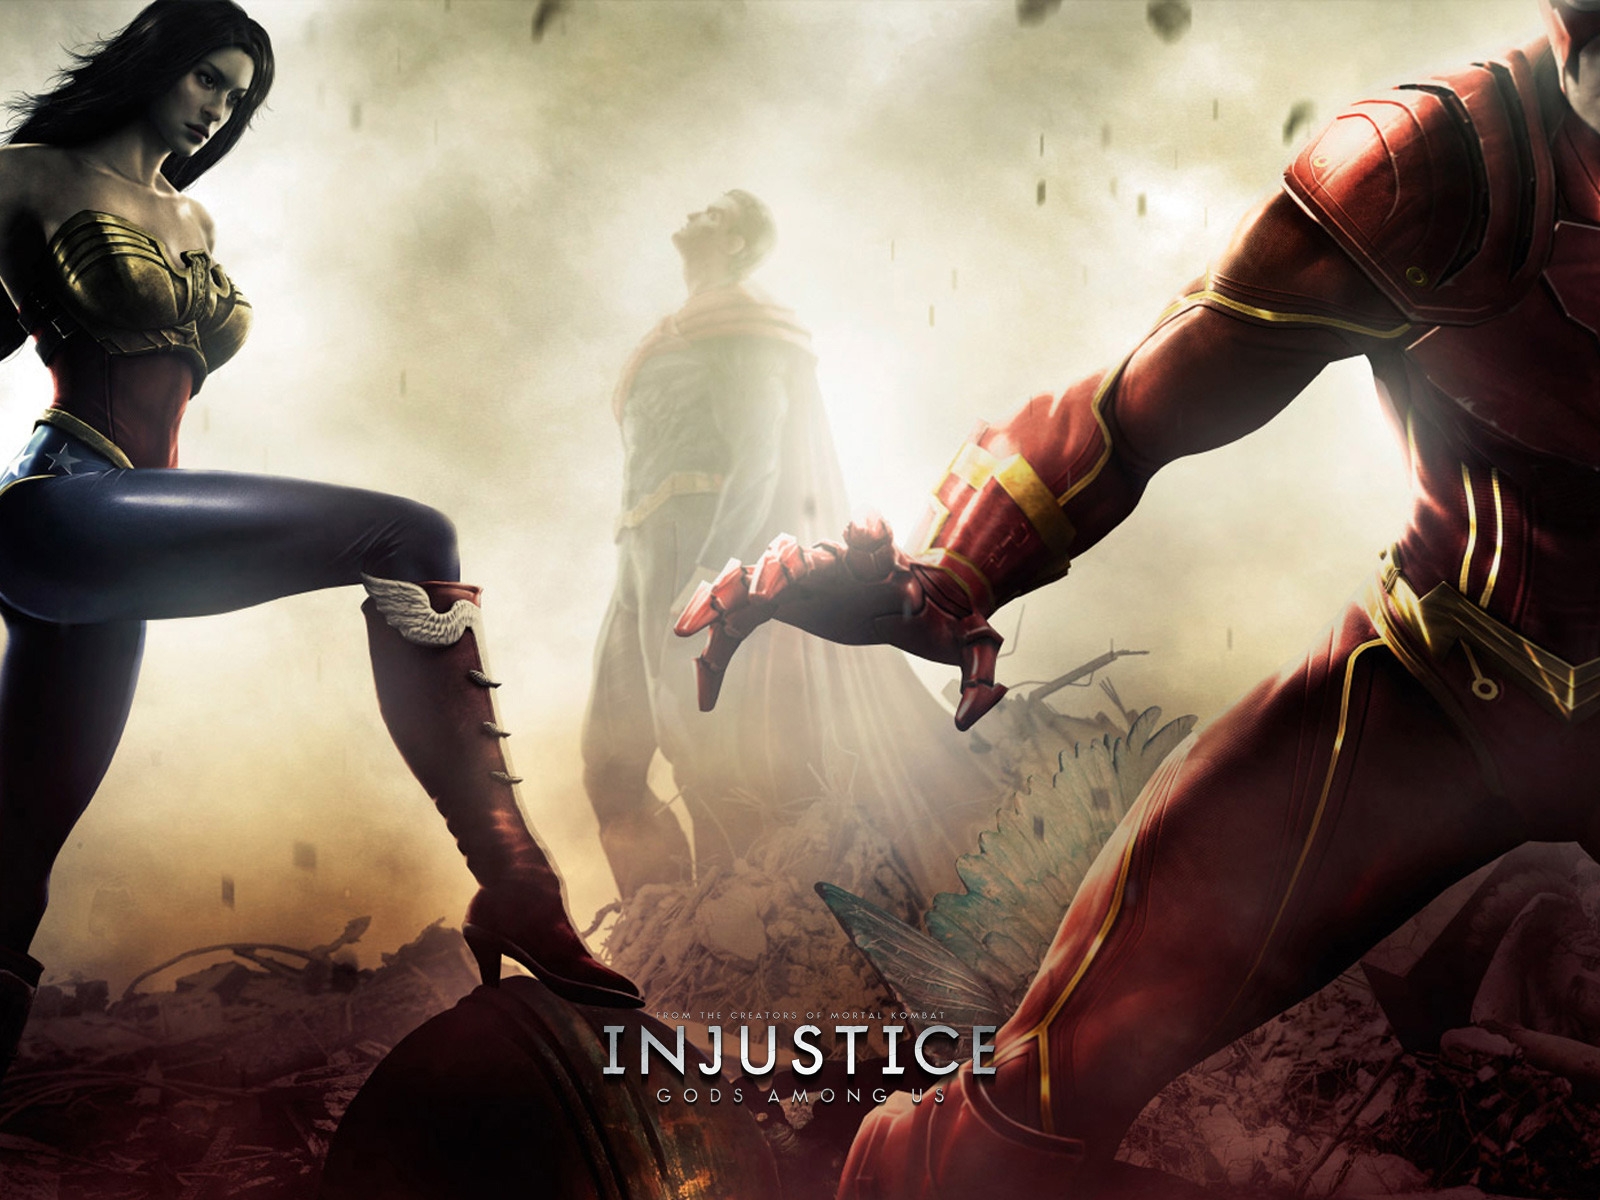 Injustice Gods Among Us Game for 1600 x 1200 resolution